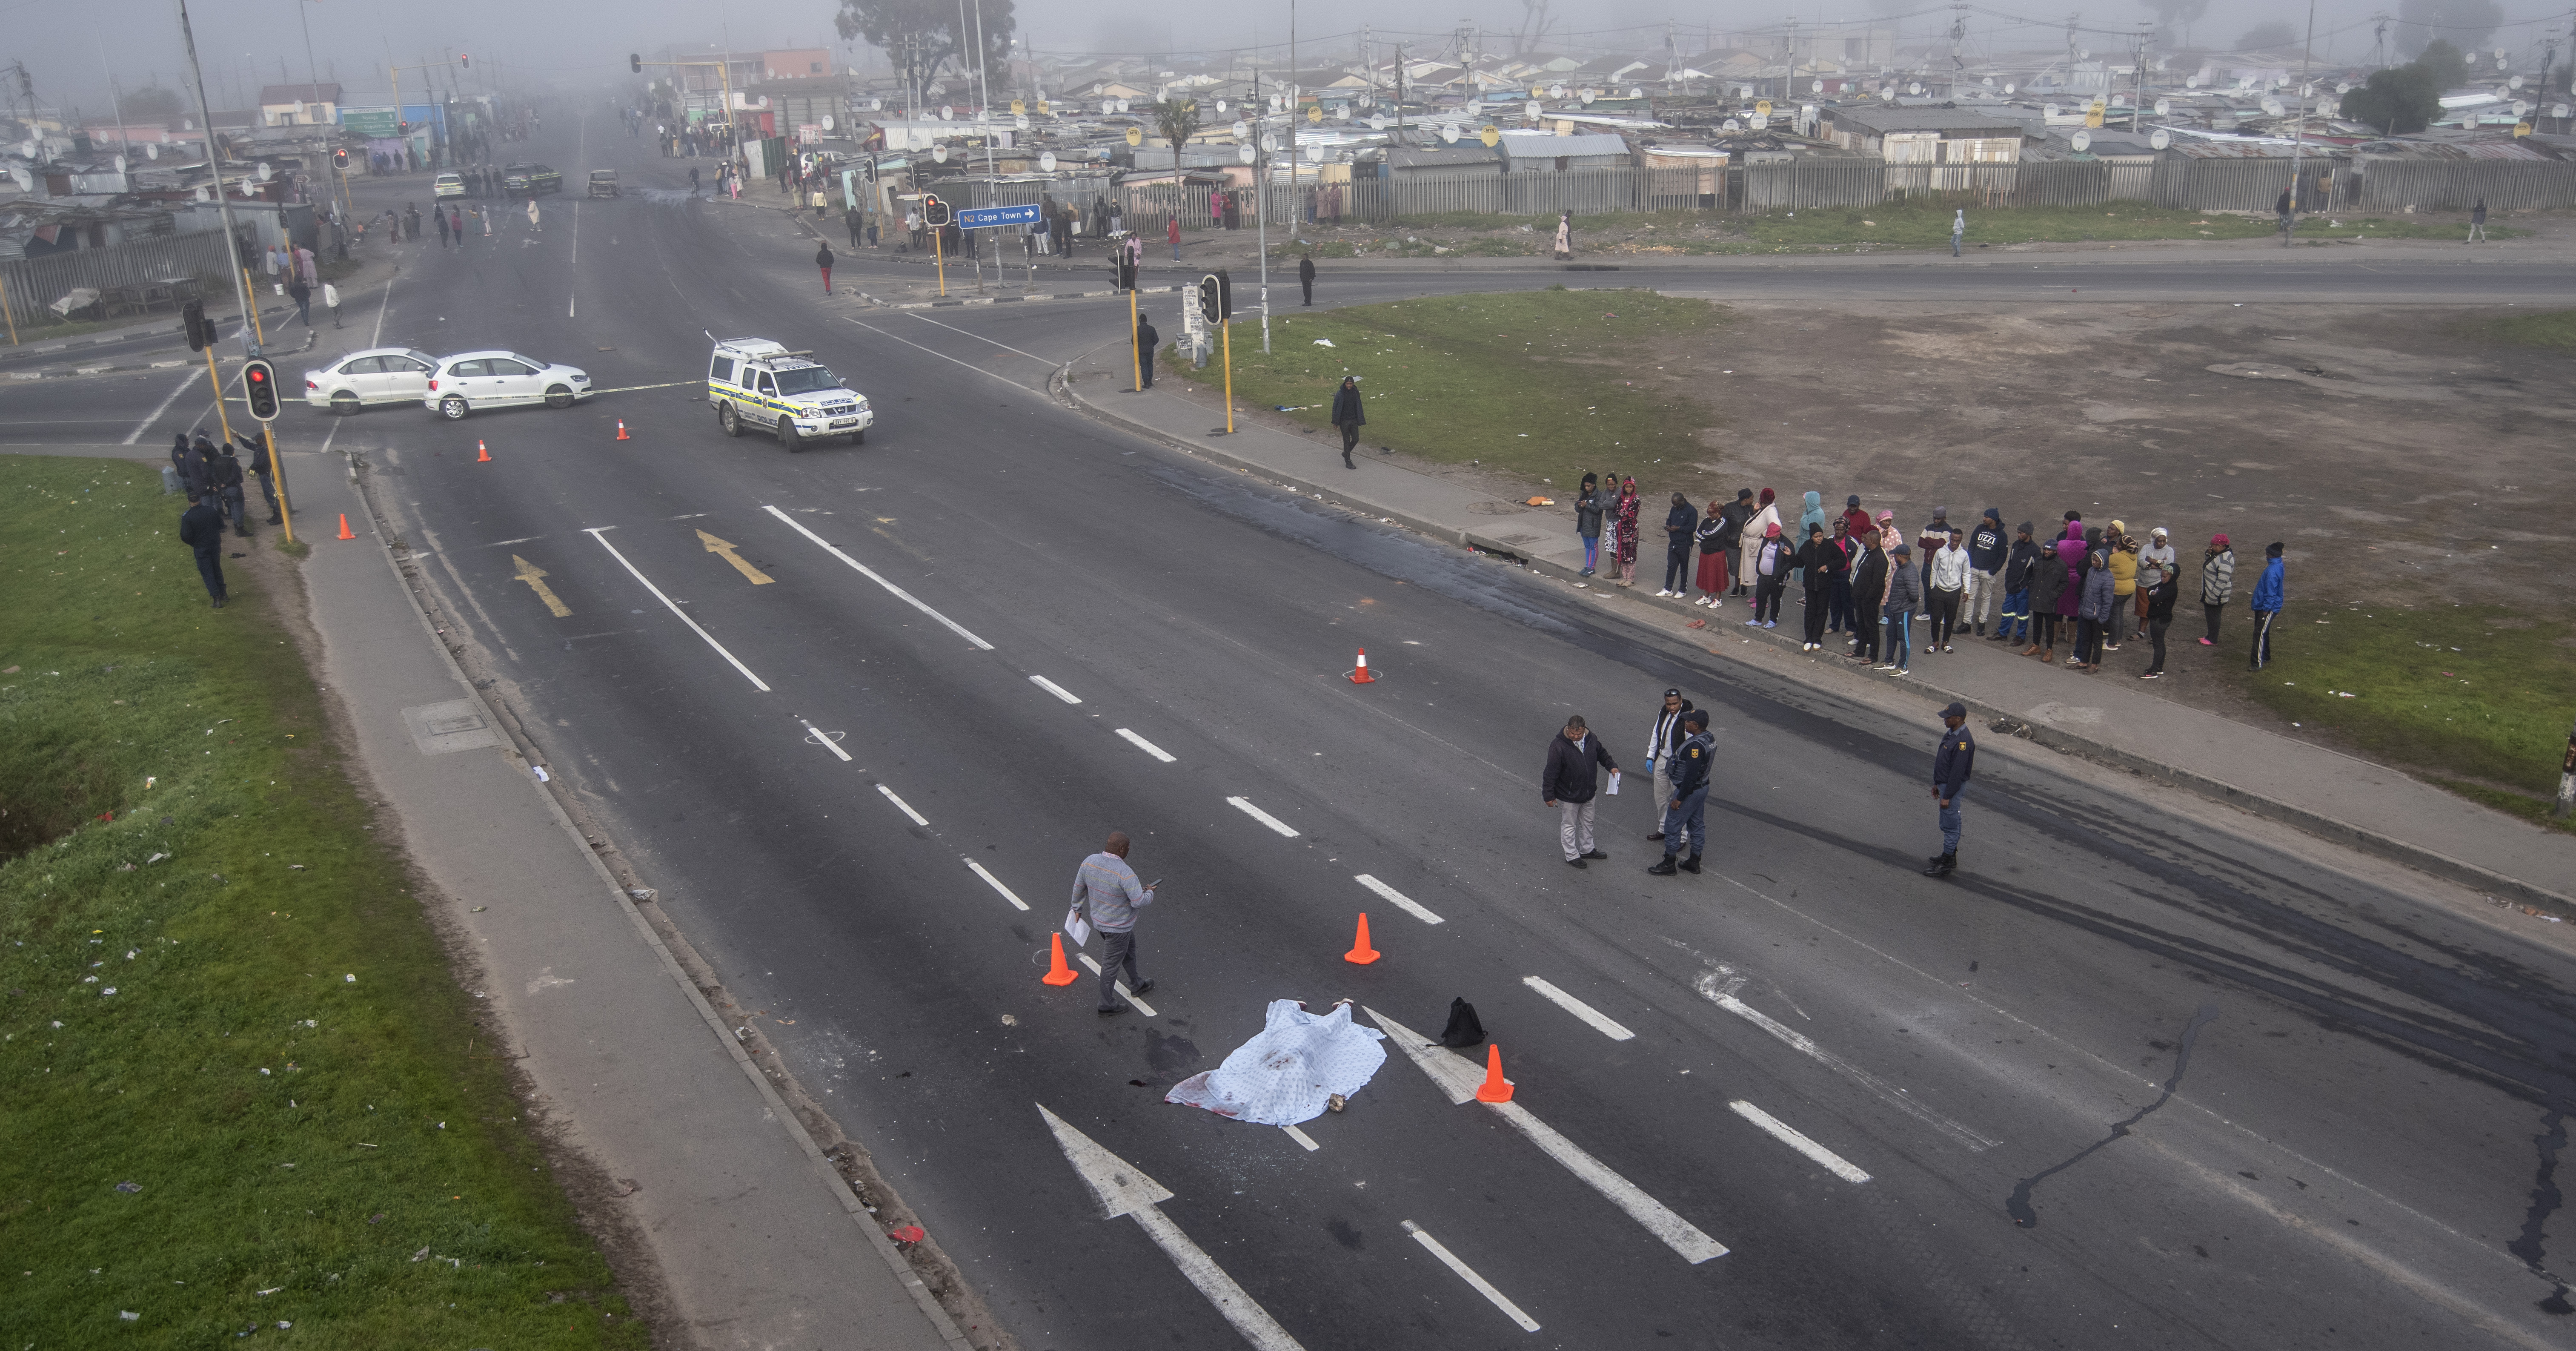 Taxi strike, deaths and violence 